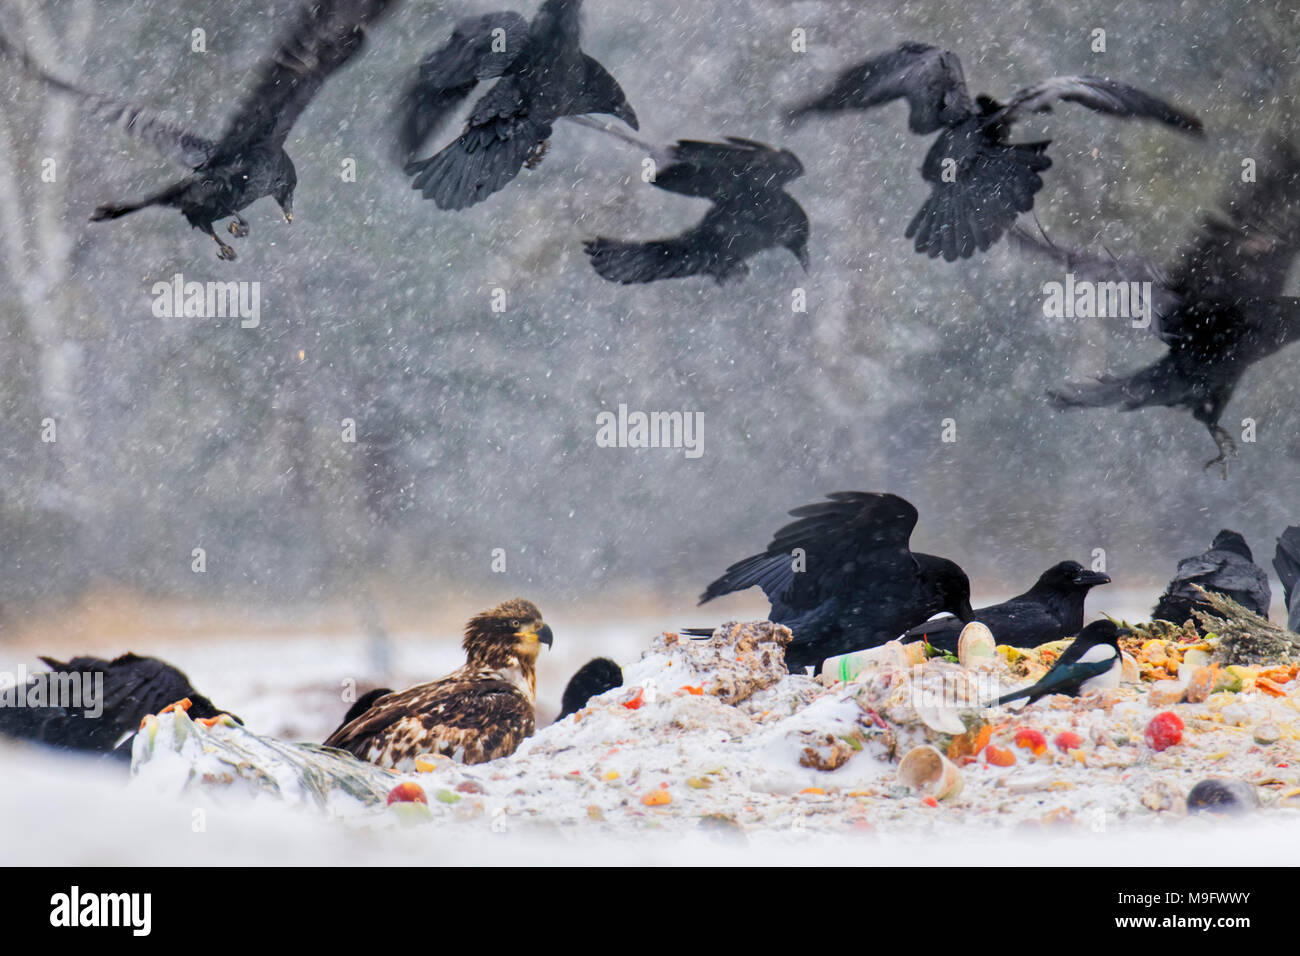 42,744.07751 Ravens, eagle, magpie, birds flying, feeding, eating waste food trash garbage in a dump during a snowstorm Stock Photo